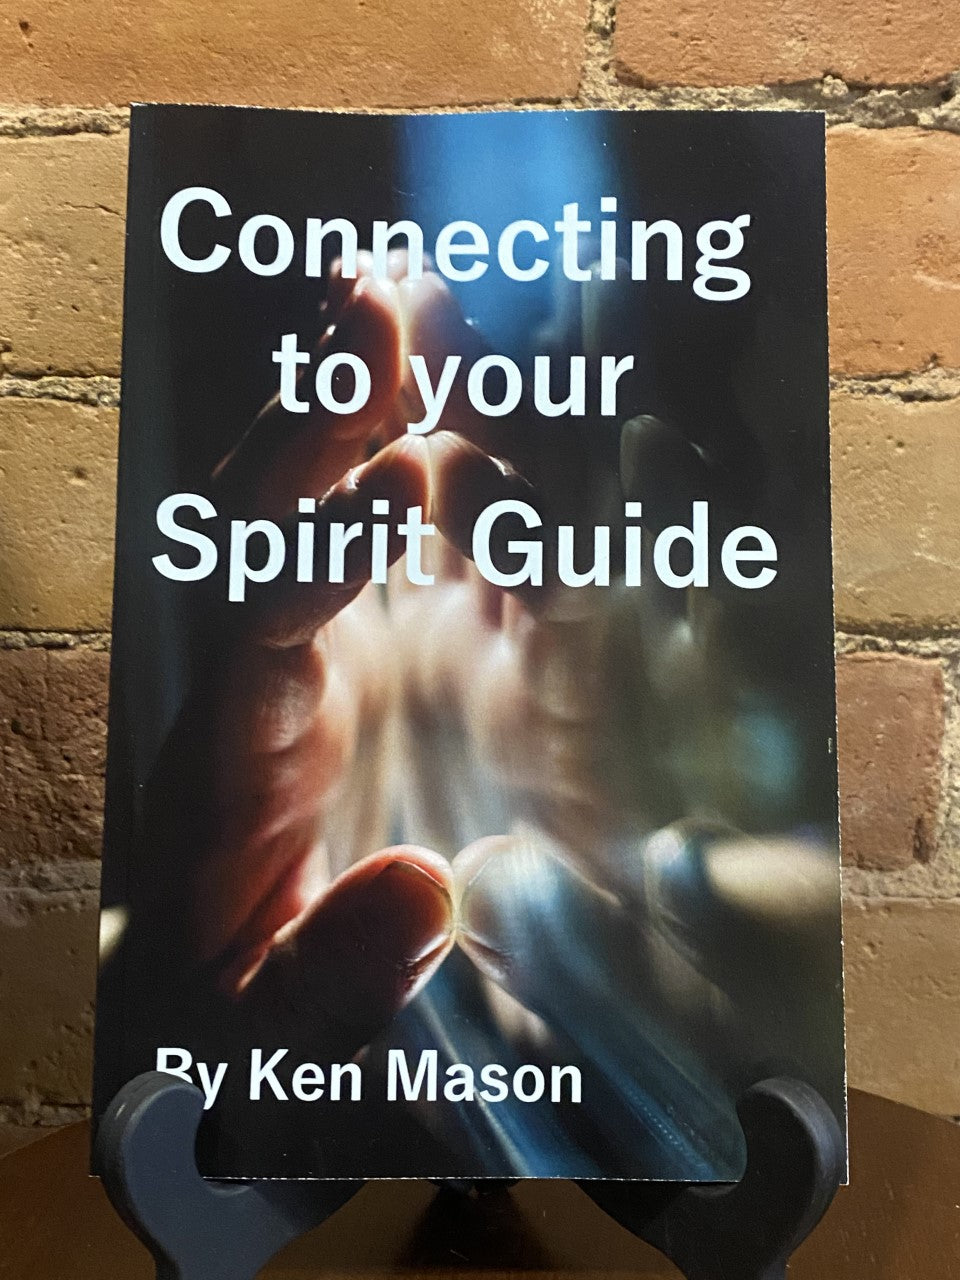 Connecting to your Spirit Guide - Ken Mason